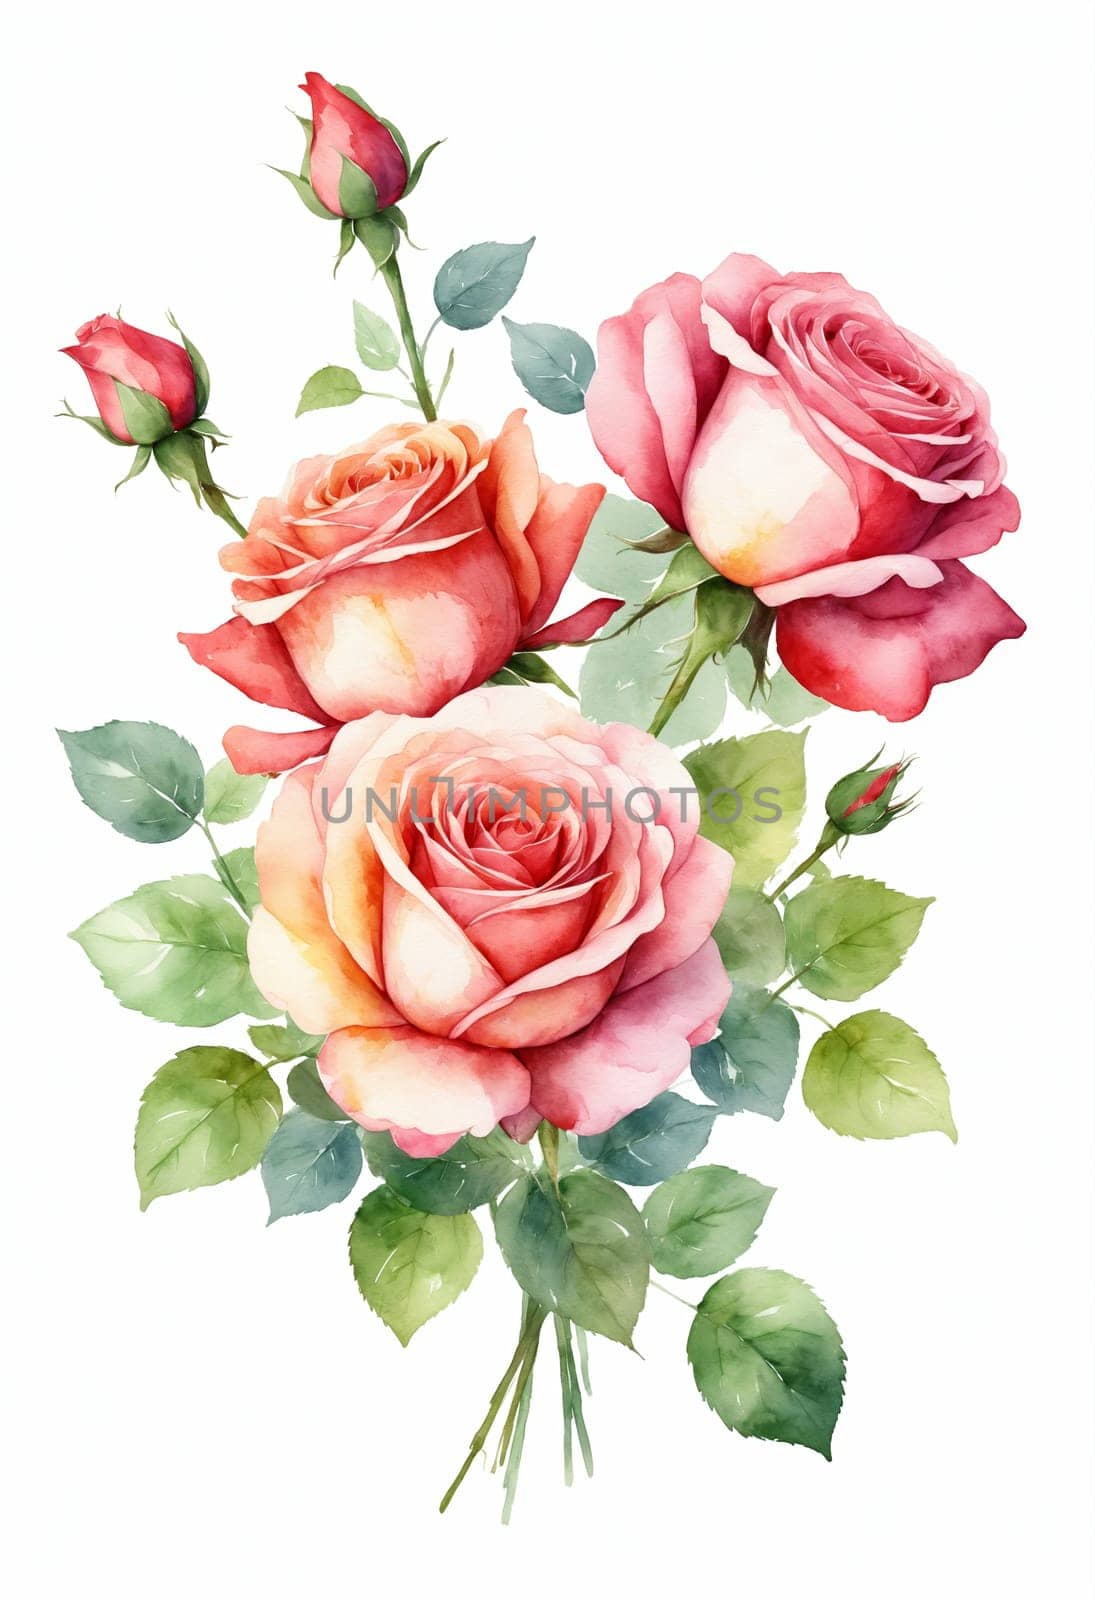 Watercolor bouquet of roses. Hand painted illustration isolated on white background by Andre1ns